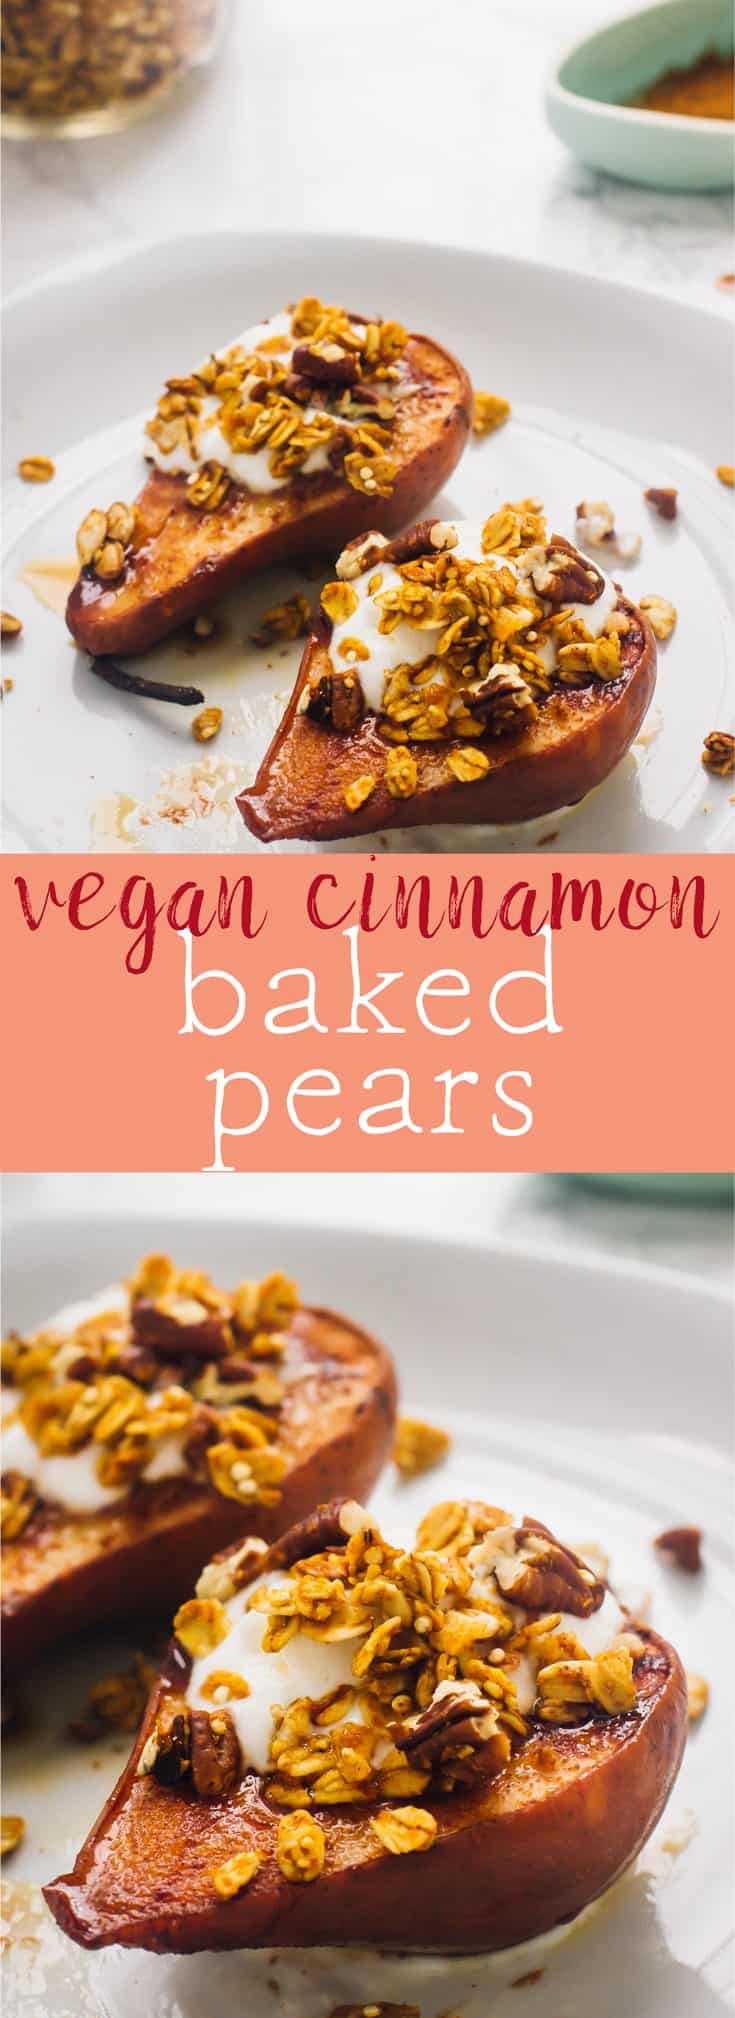 This Vegan Cinnamon Baked Pears are a real tasty fall treat! Just three ingredients, so soft they taste caramelised and so easy to make!